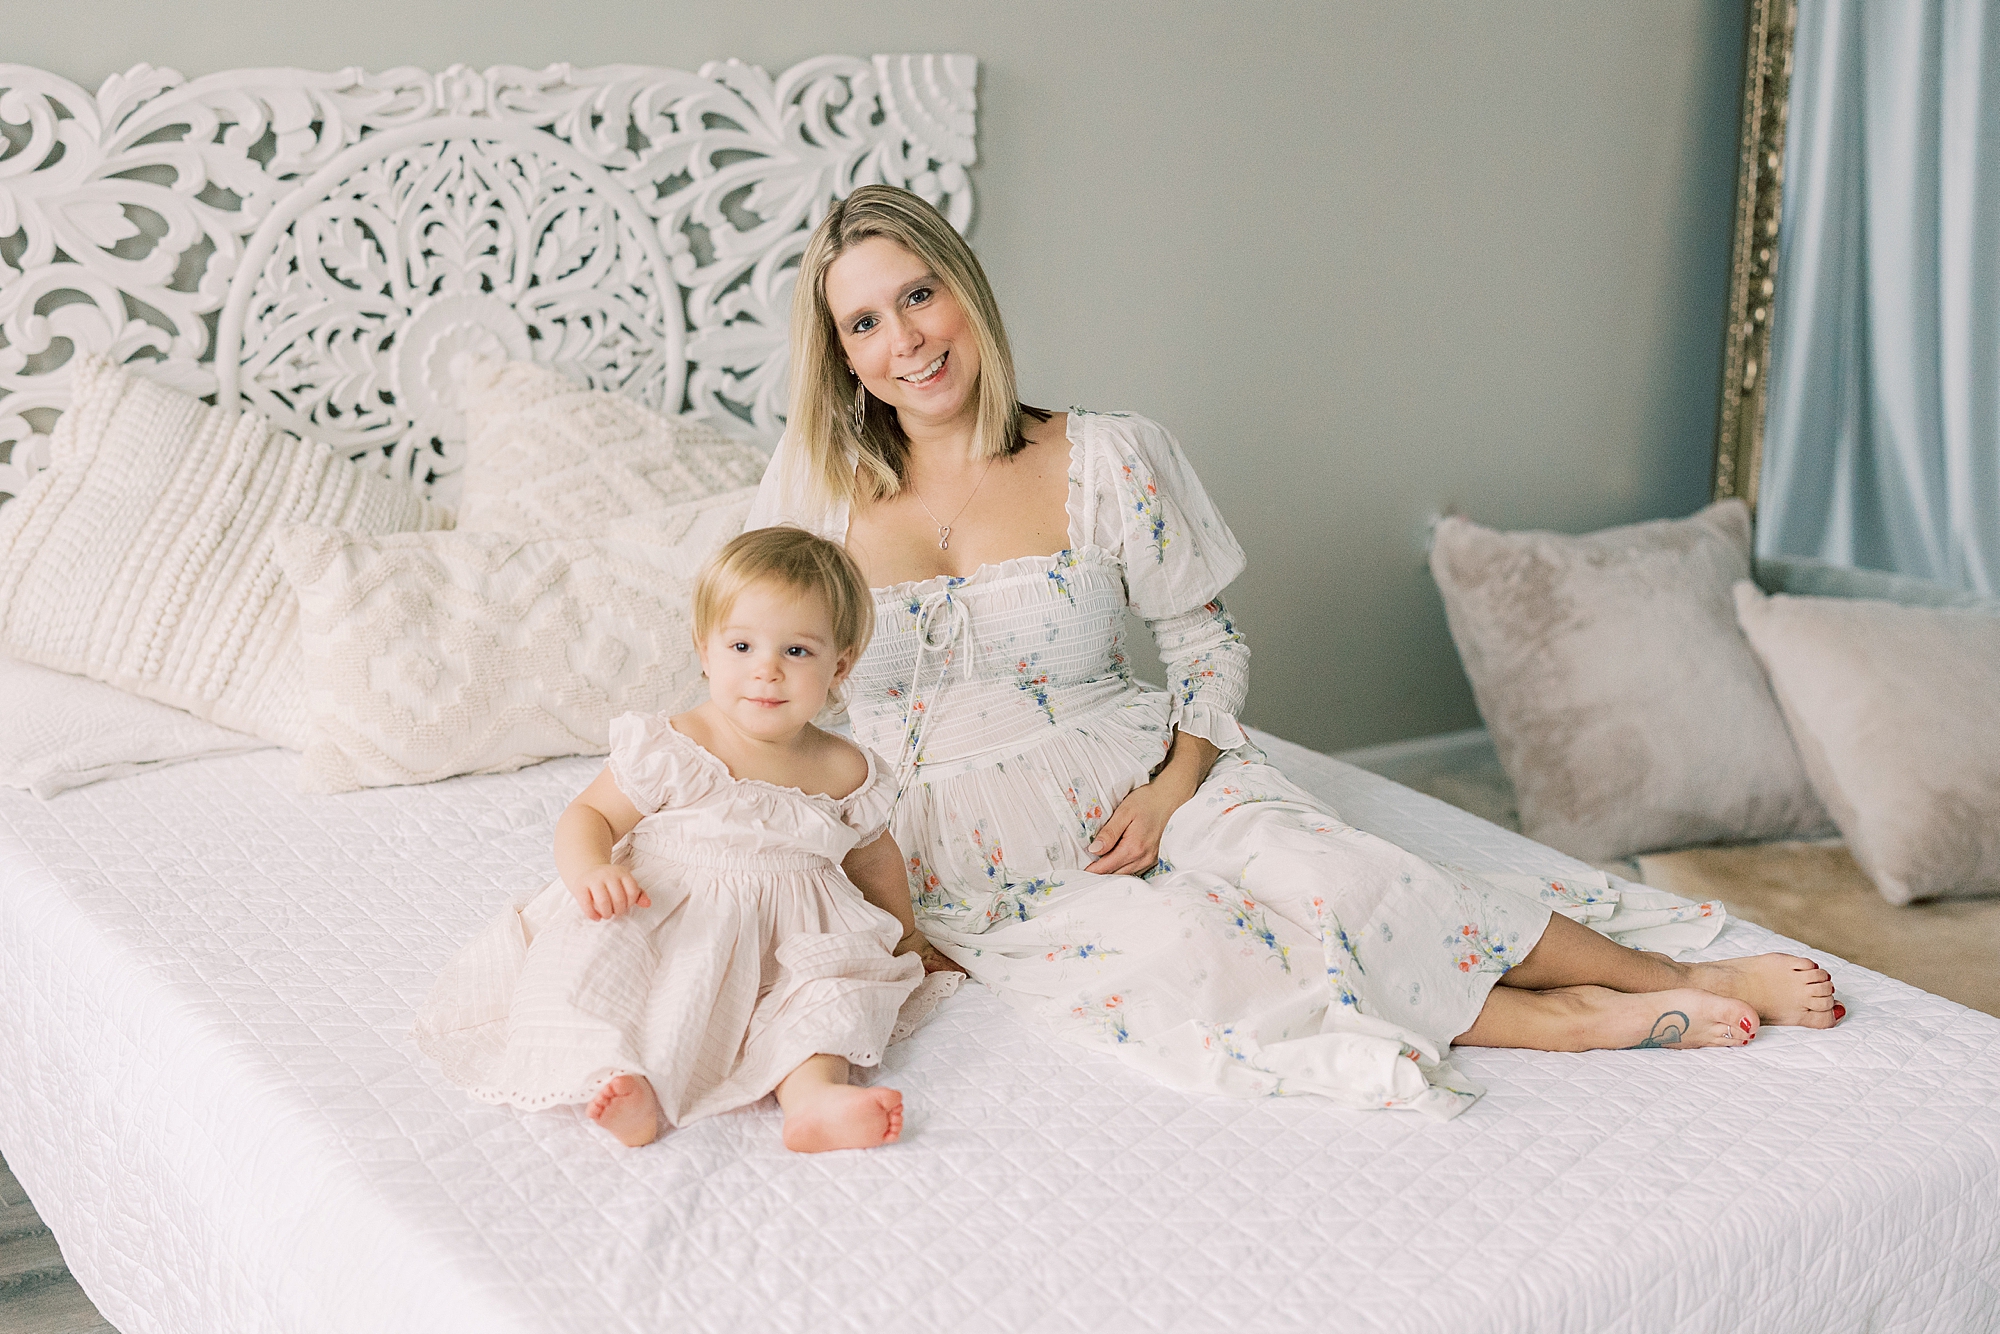 mom sits on white bed holding baby bump and toddler next to her